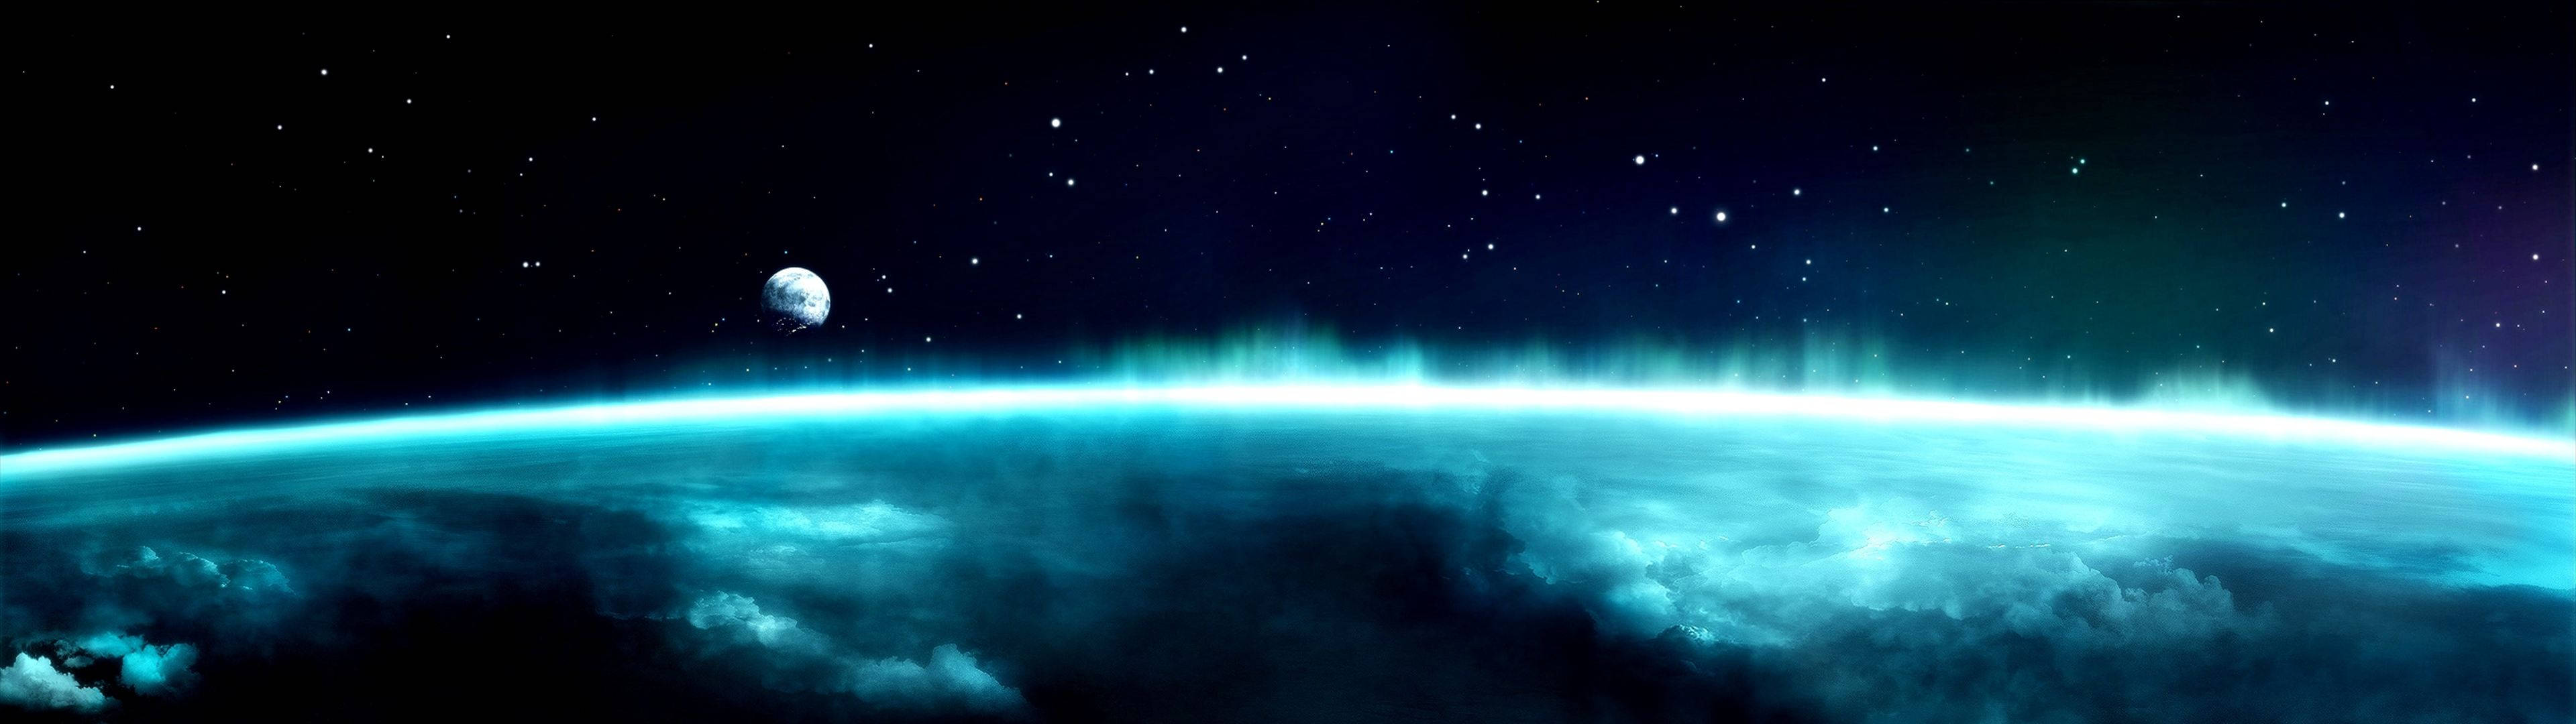 Space View Dual Monitor Background